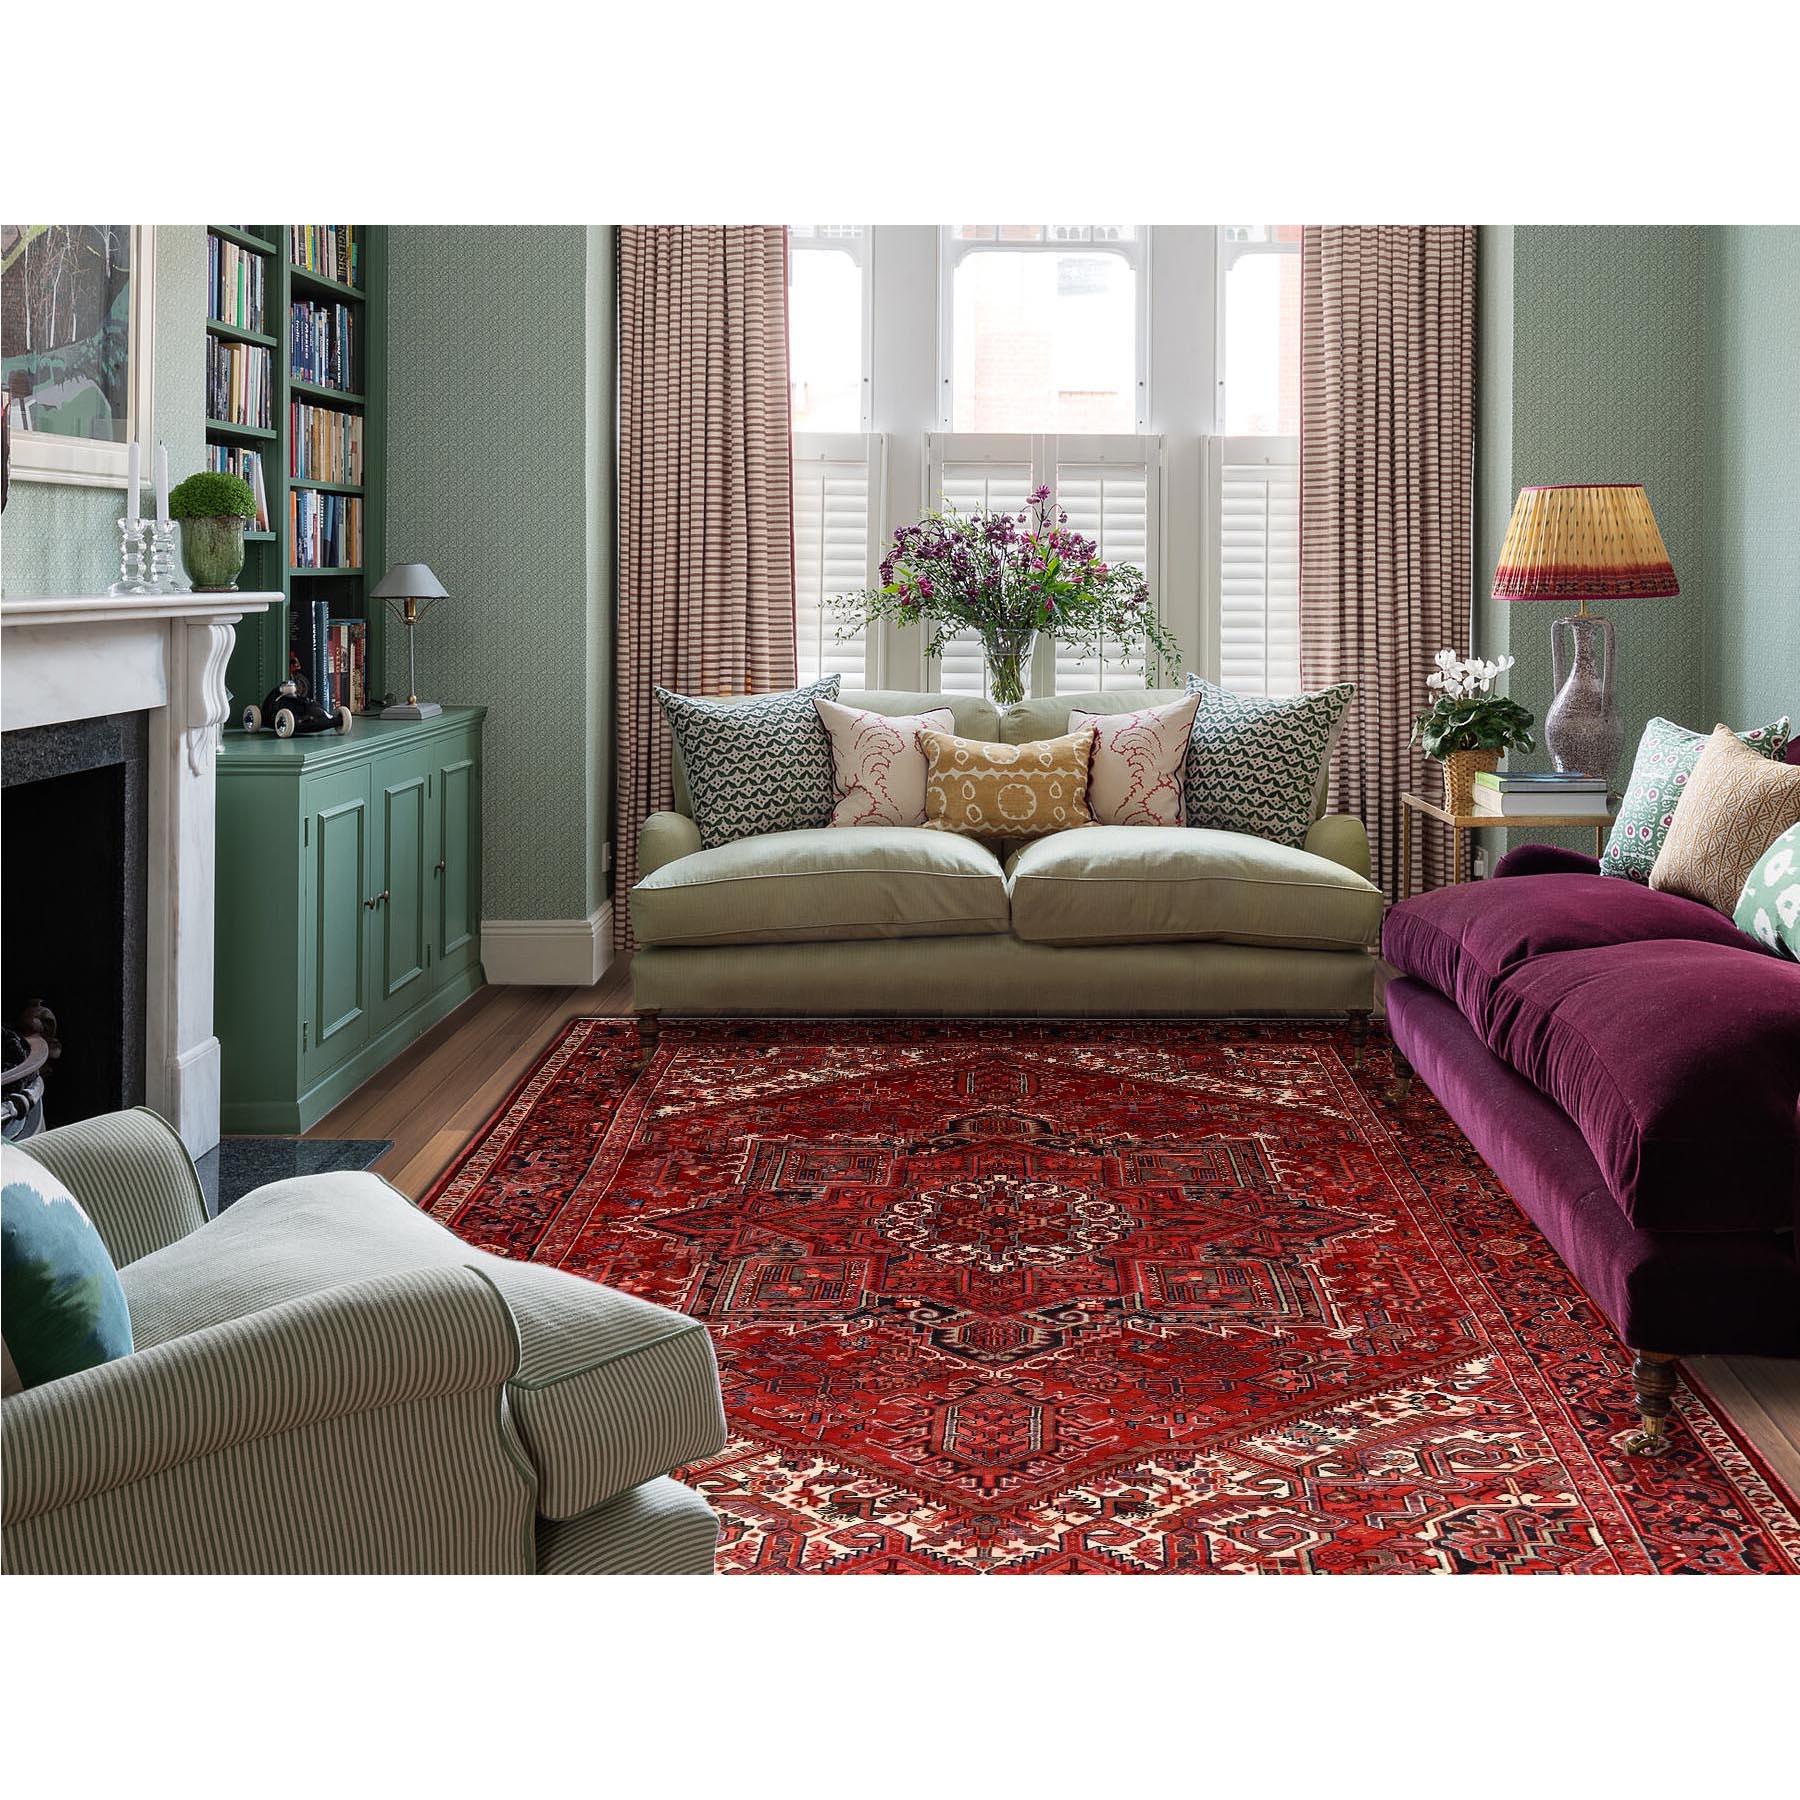 This fabulous Hand-Knotted carpet has been created and designed for extra strength and durability. This rug has been handcrafted for weeks in the traditional method that is used to make
Exact Rug Size in Feet and Inches : 8'1